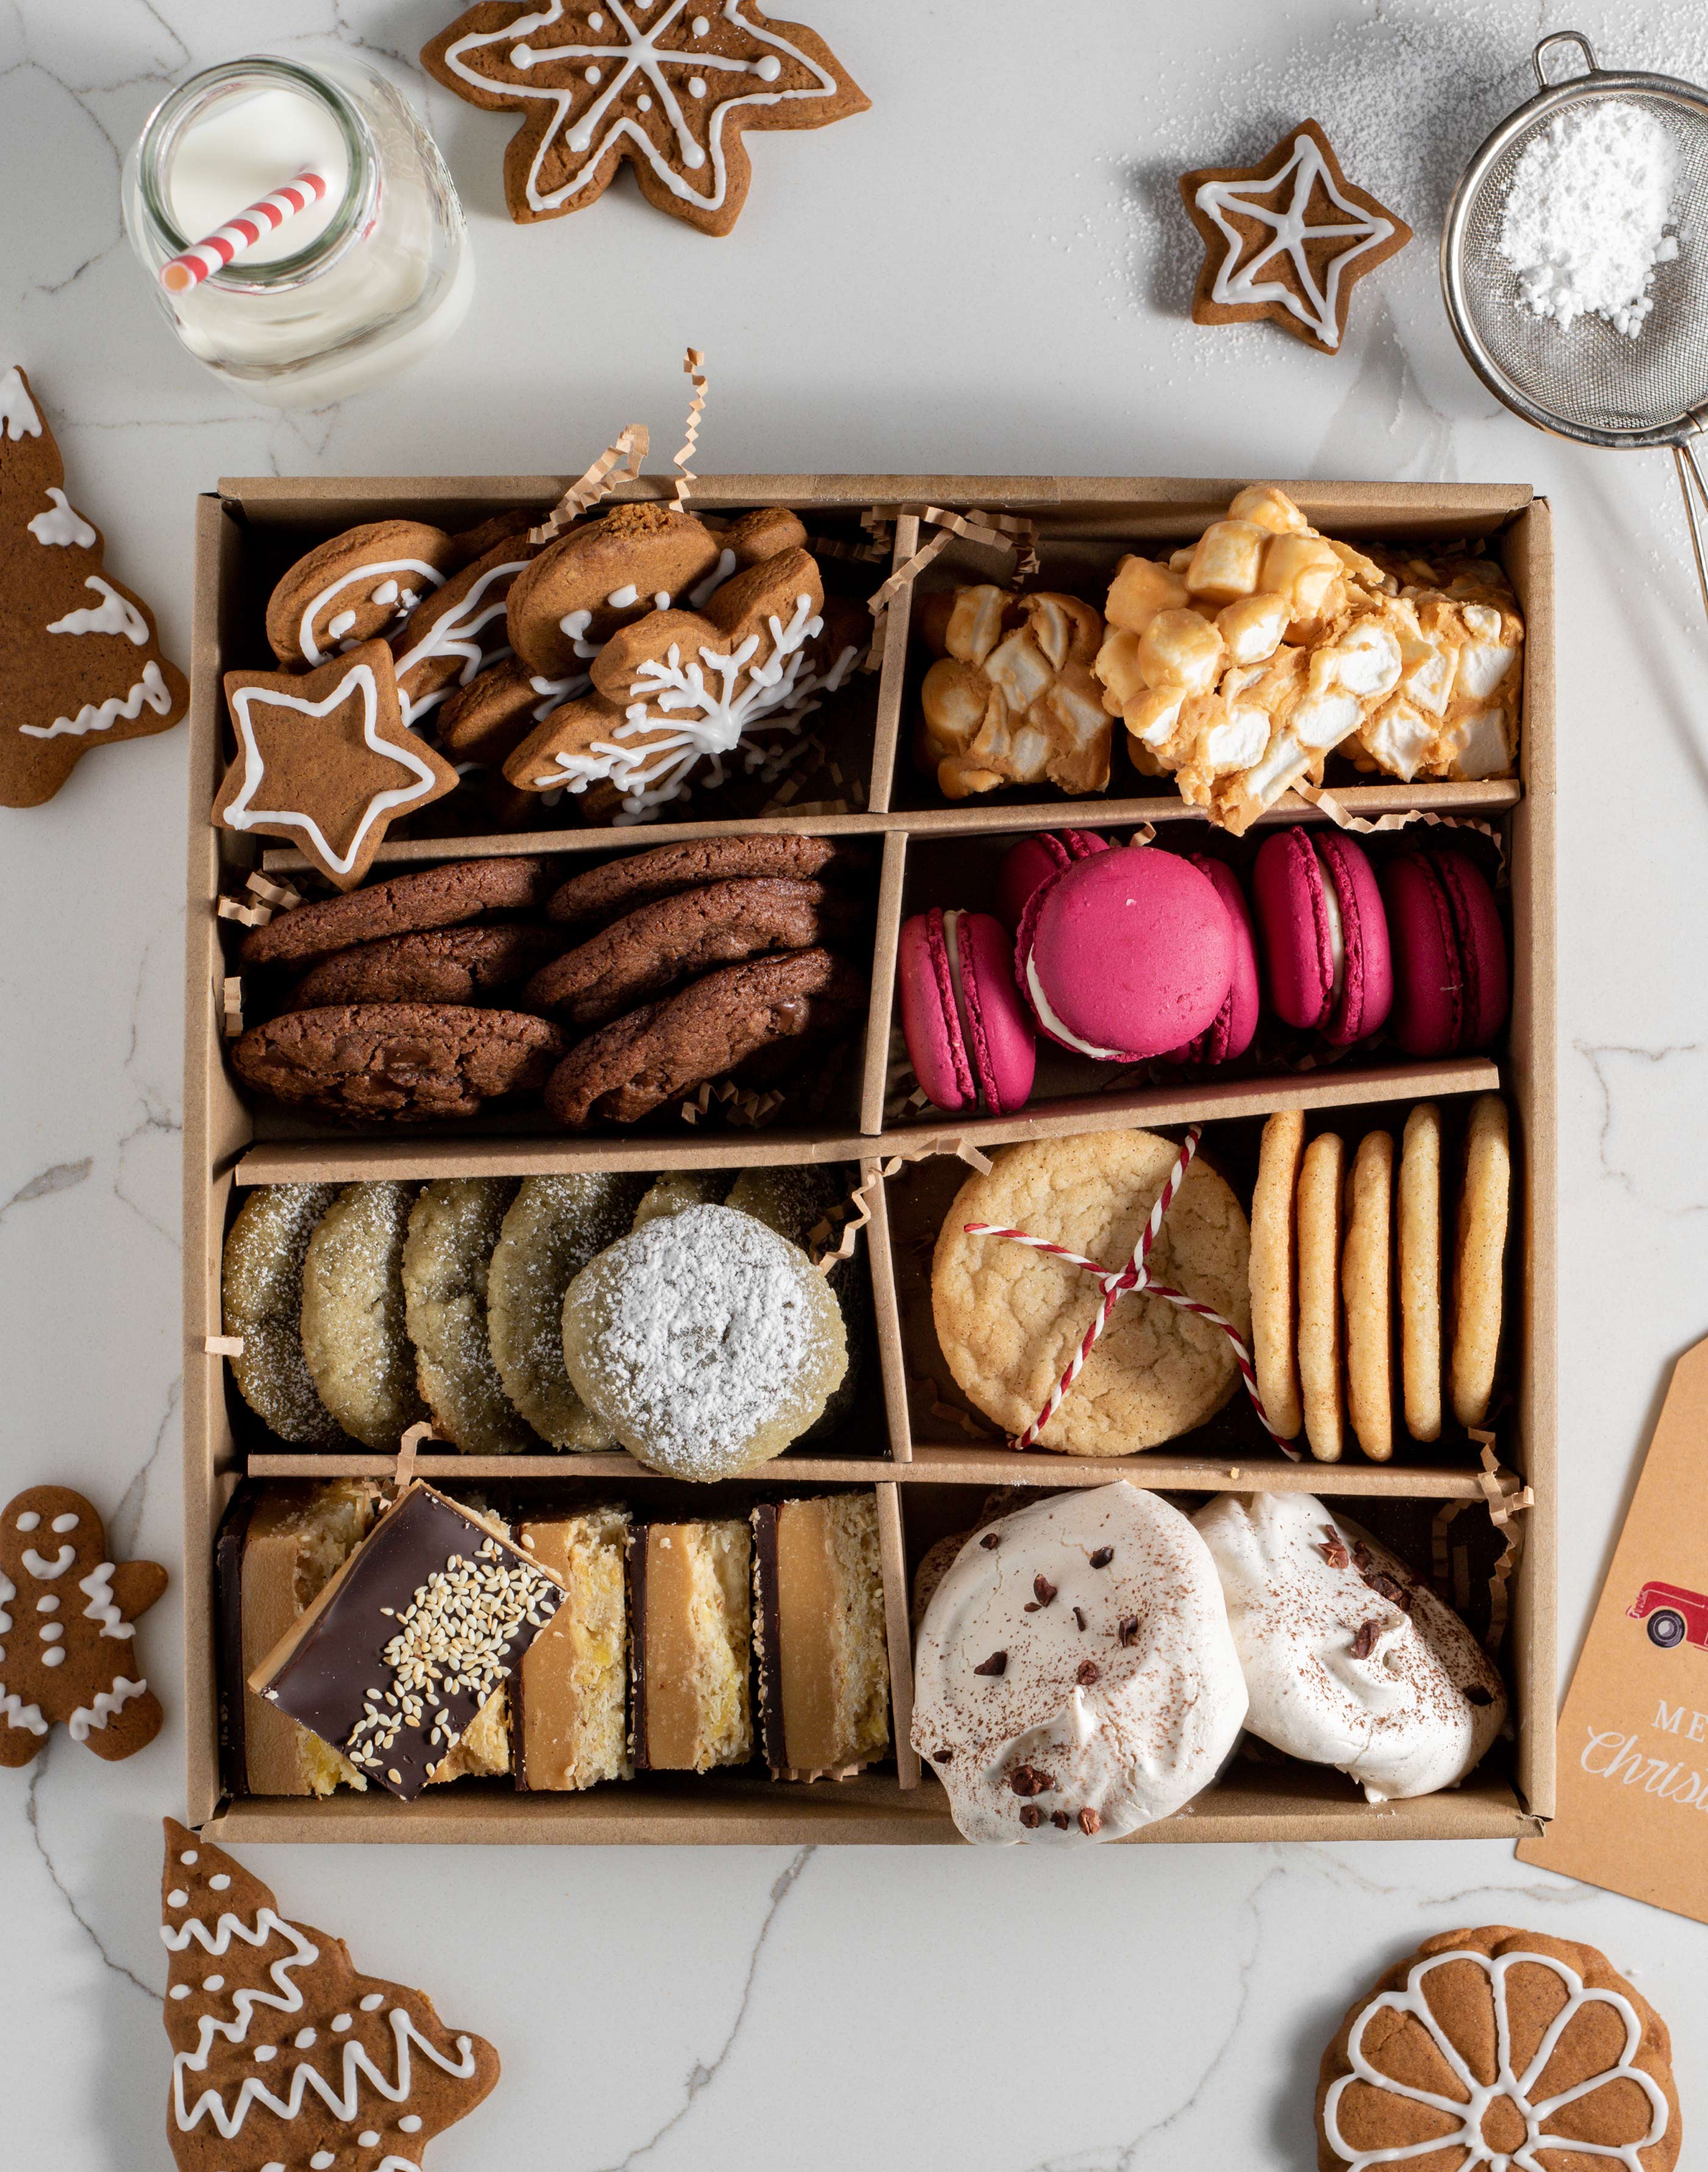 Bake 7 Different Cookies for a Holiday Cookie Box in One Day